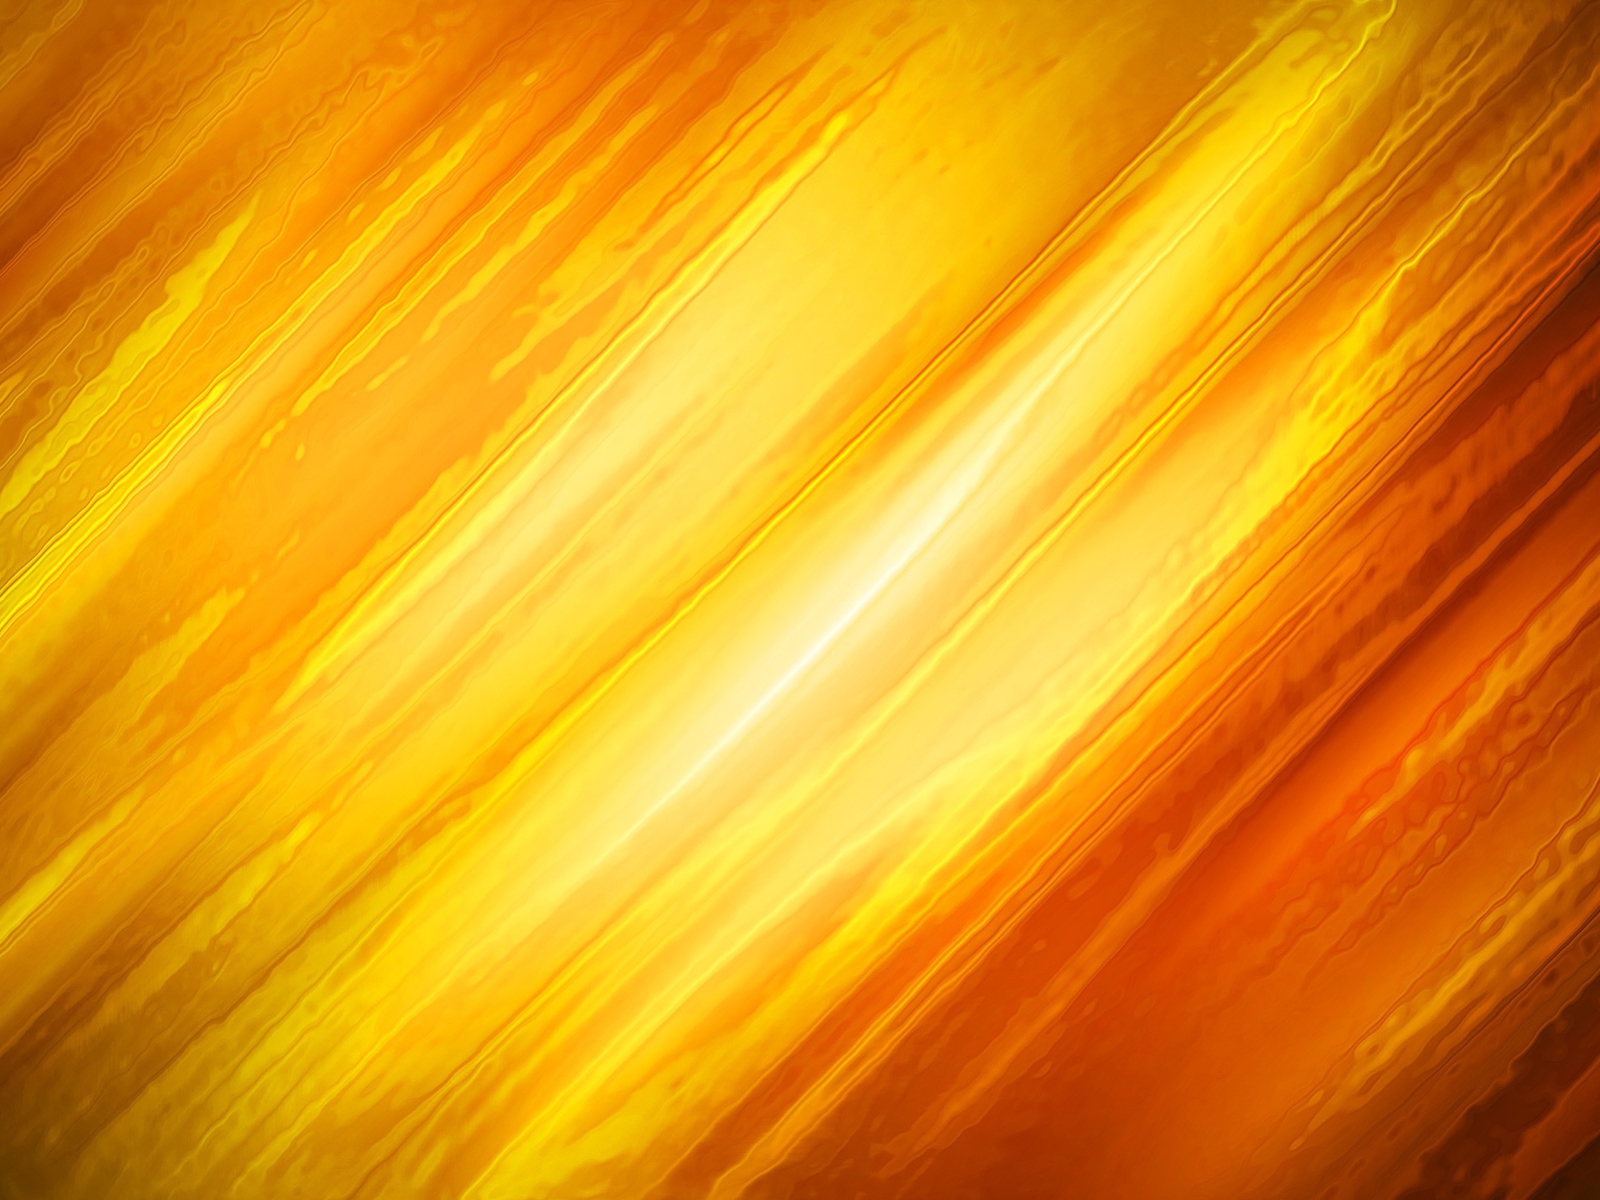 Abstract Yellow And Orange Background wallpaper 1600x1200